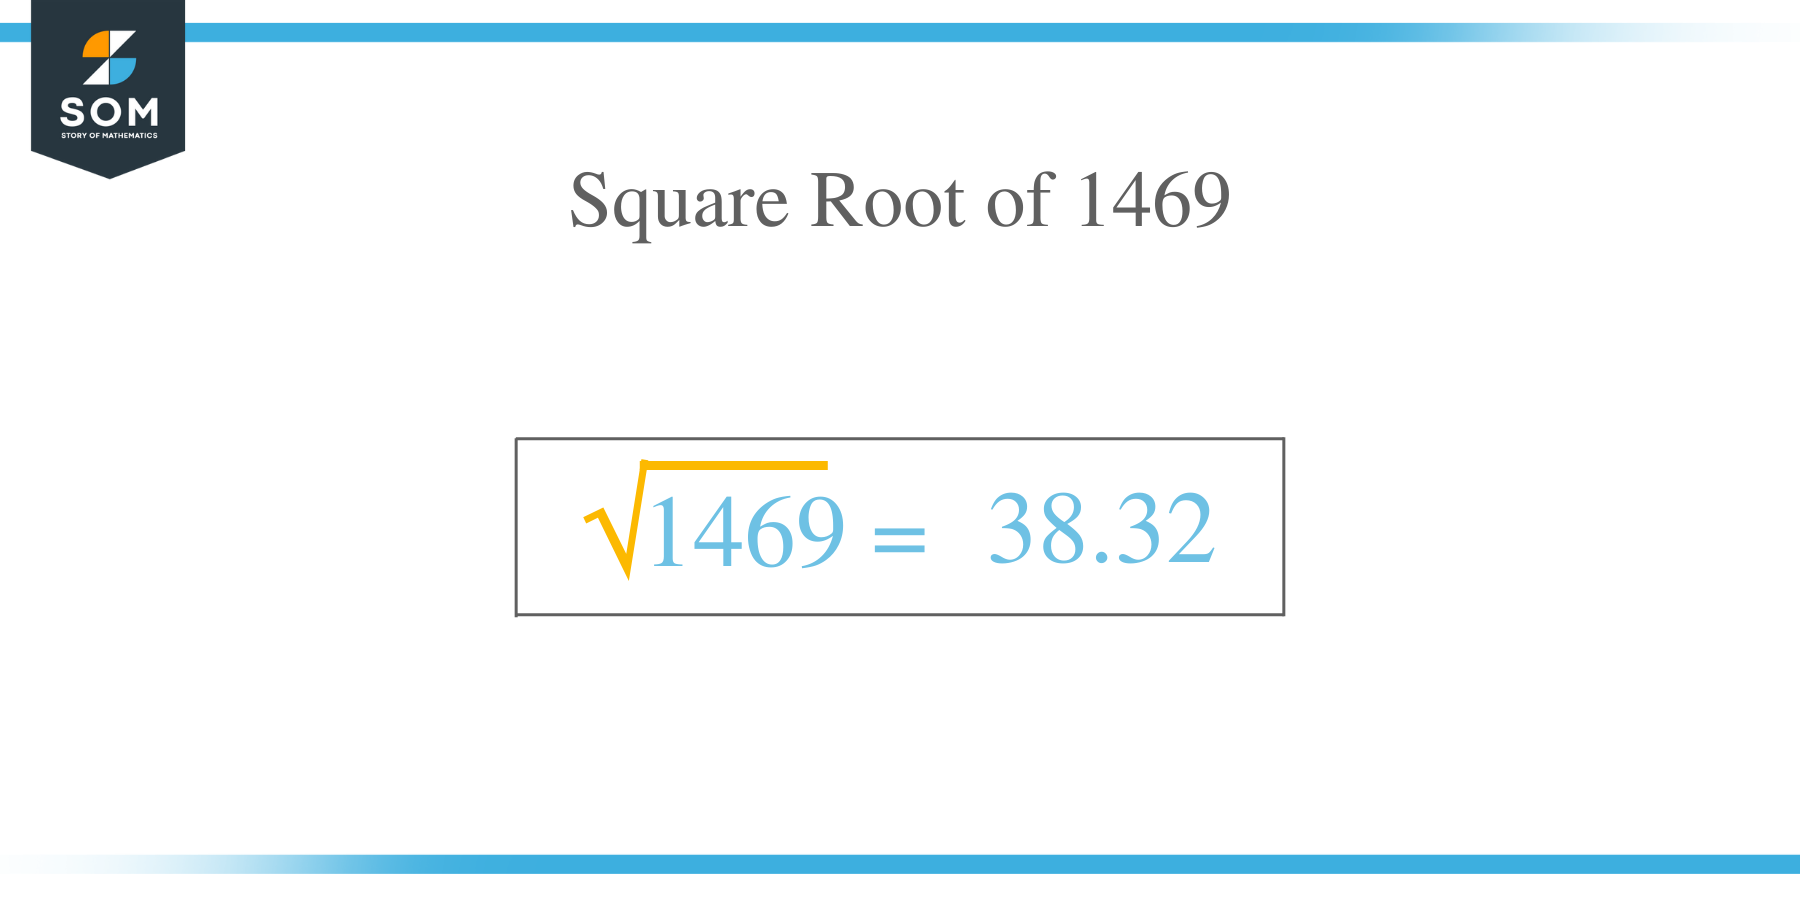 Square Root of 1469